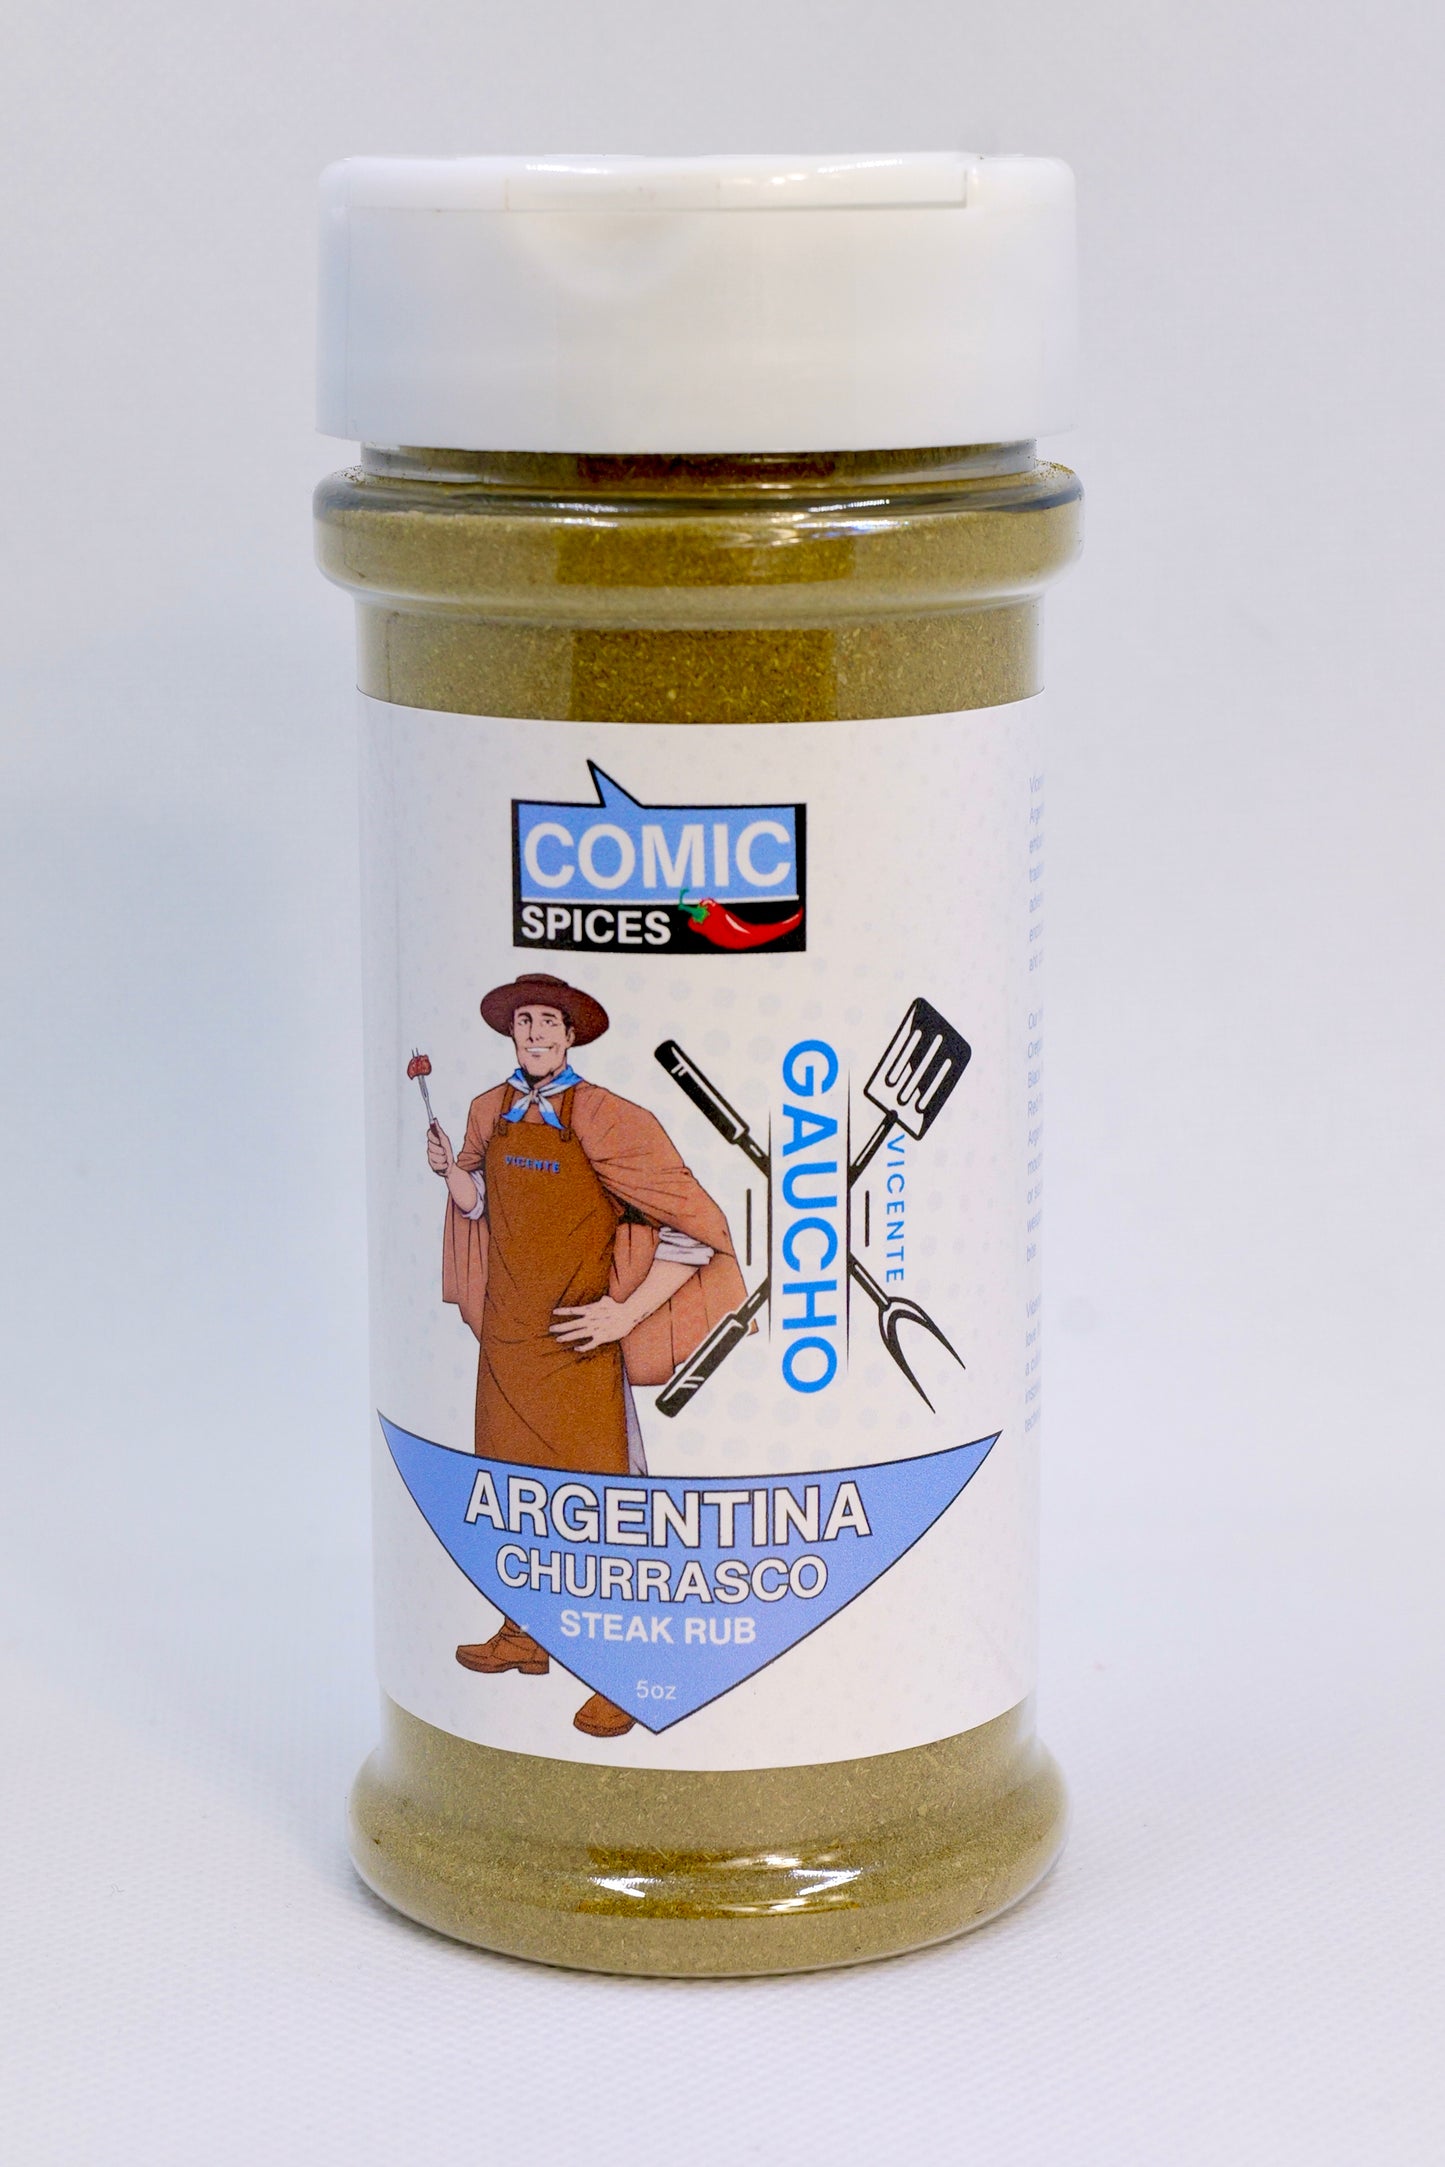 𝗔𝗿𝗴𝗲𝗻𝘁𝗶𝗻𝗮 𝗖𝗵𝘂𝗿𝗿𝗮𝘀𝗰𝗼 𝗦𝘁𝗲𝗮𝗸 𝗥𝘂𝗯 - Herbed style seasoning, for chimichurri sauce or marinade, perfect on beef, chicken, seafood, and veggies.